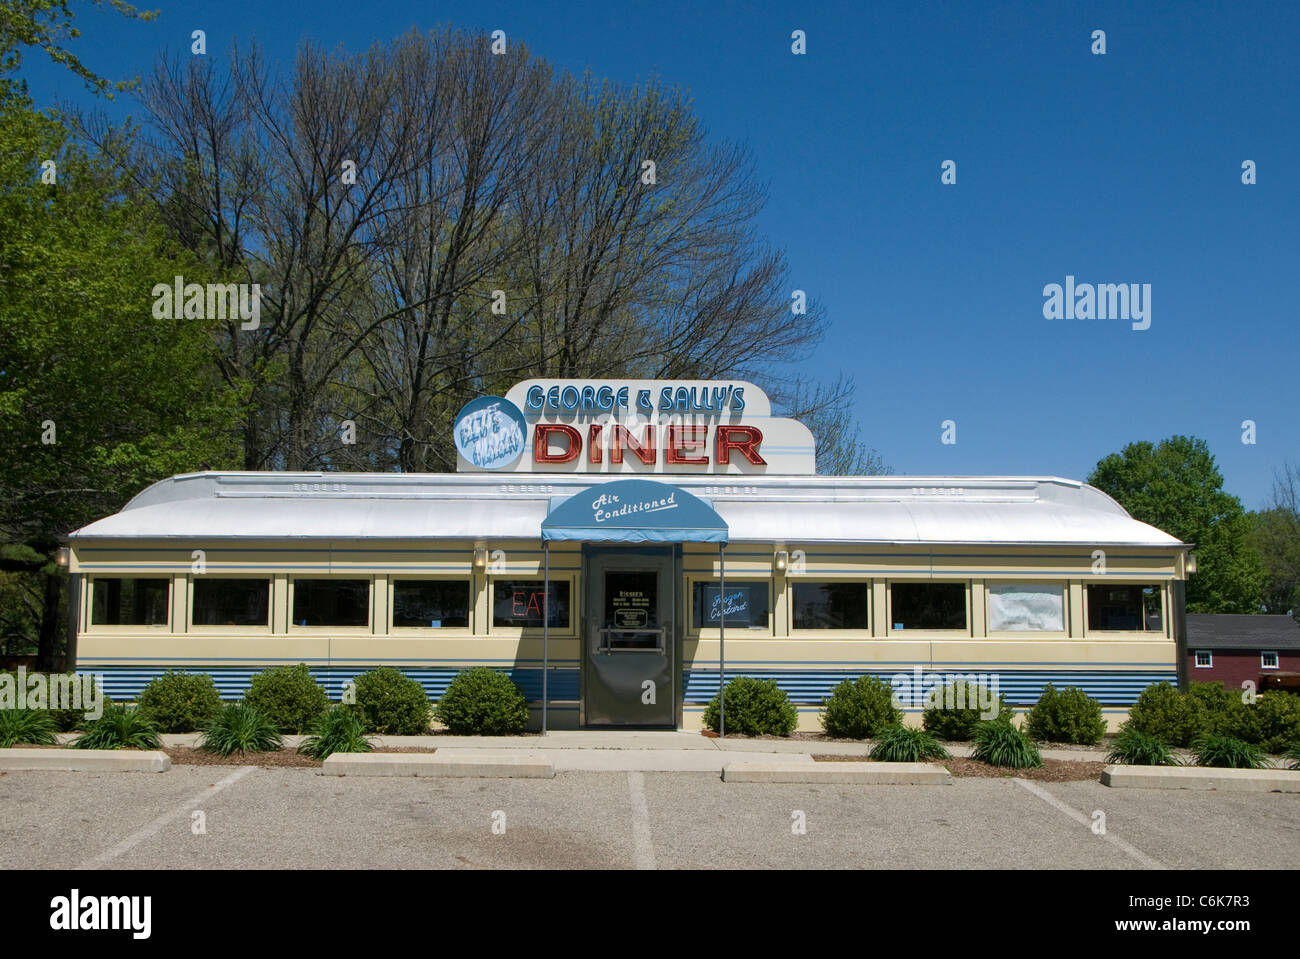 George and Sally's Diner,  Gilmore Car Museum, Hickory Corners, Michigan, USA Stock Photo